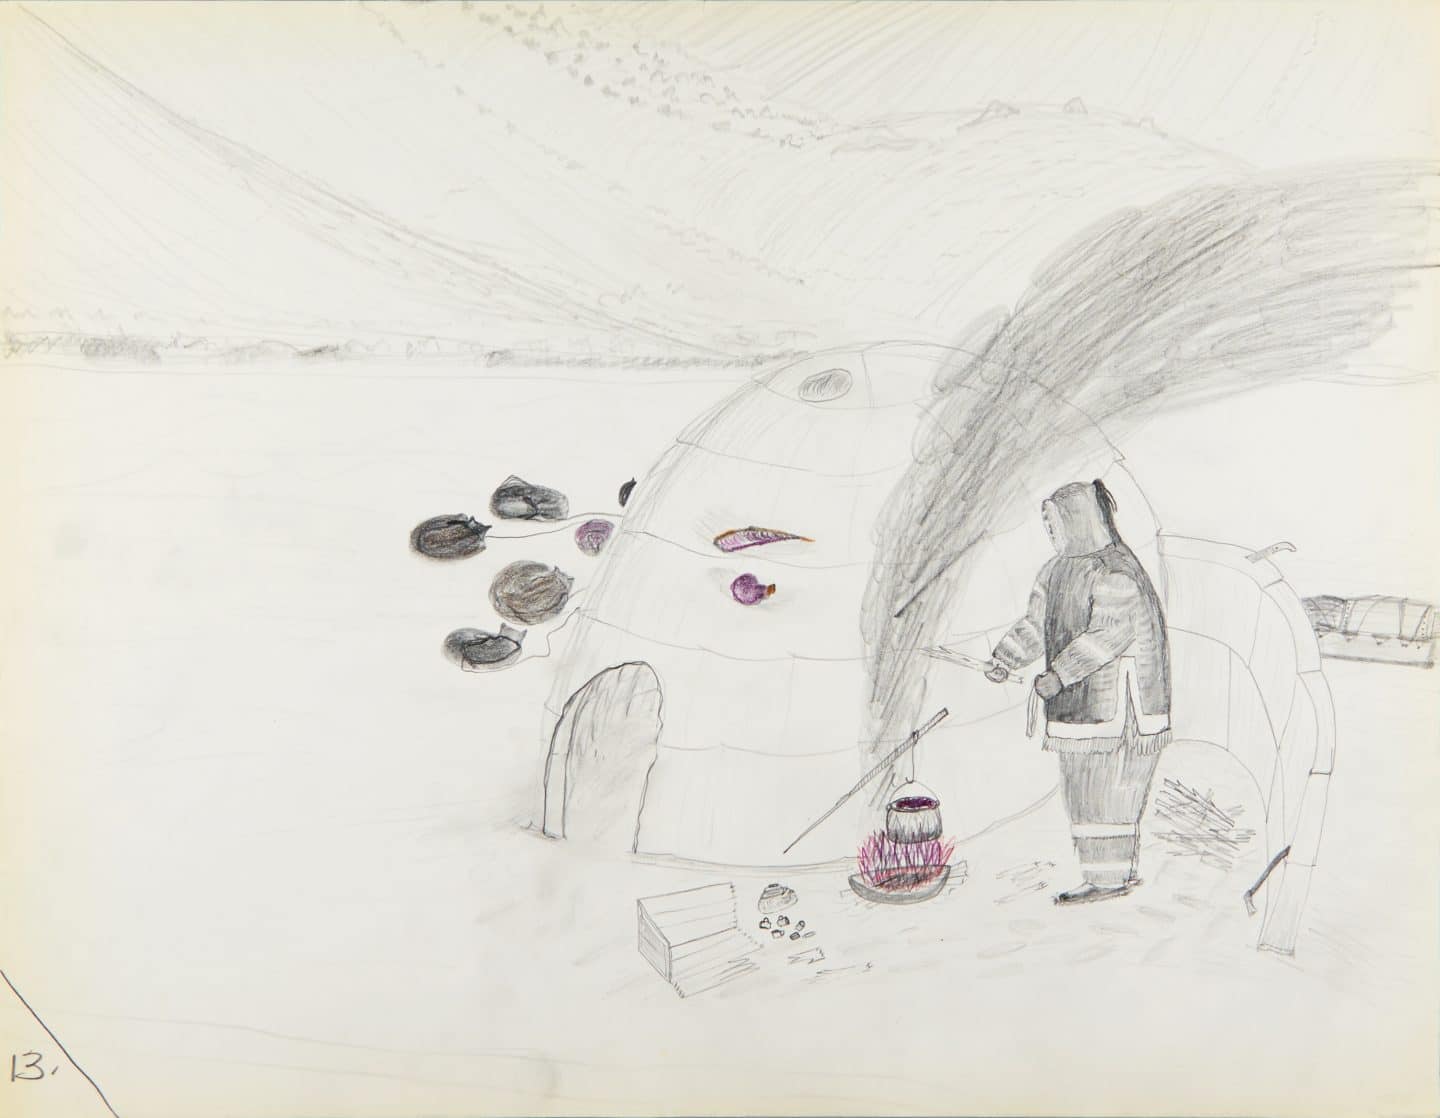 Cornelius (Kooneeloosee) Nutarak (Pond Inlet), Using Blubber to Make Fuel, 1964, graphite, pencil crayon on paper, 50 x 65 cm, Canadian Museum of History, IV-C-6952